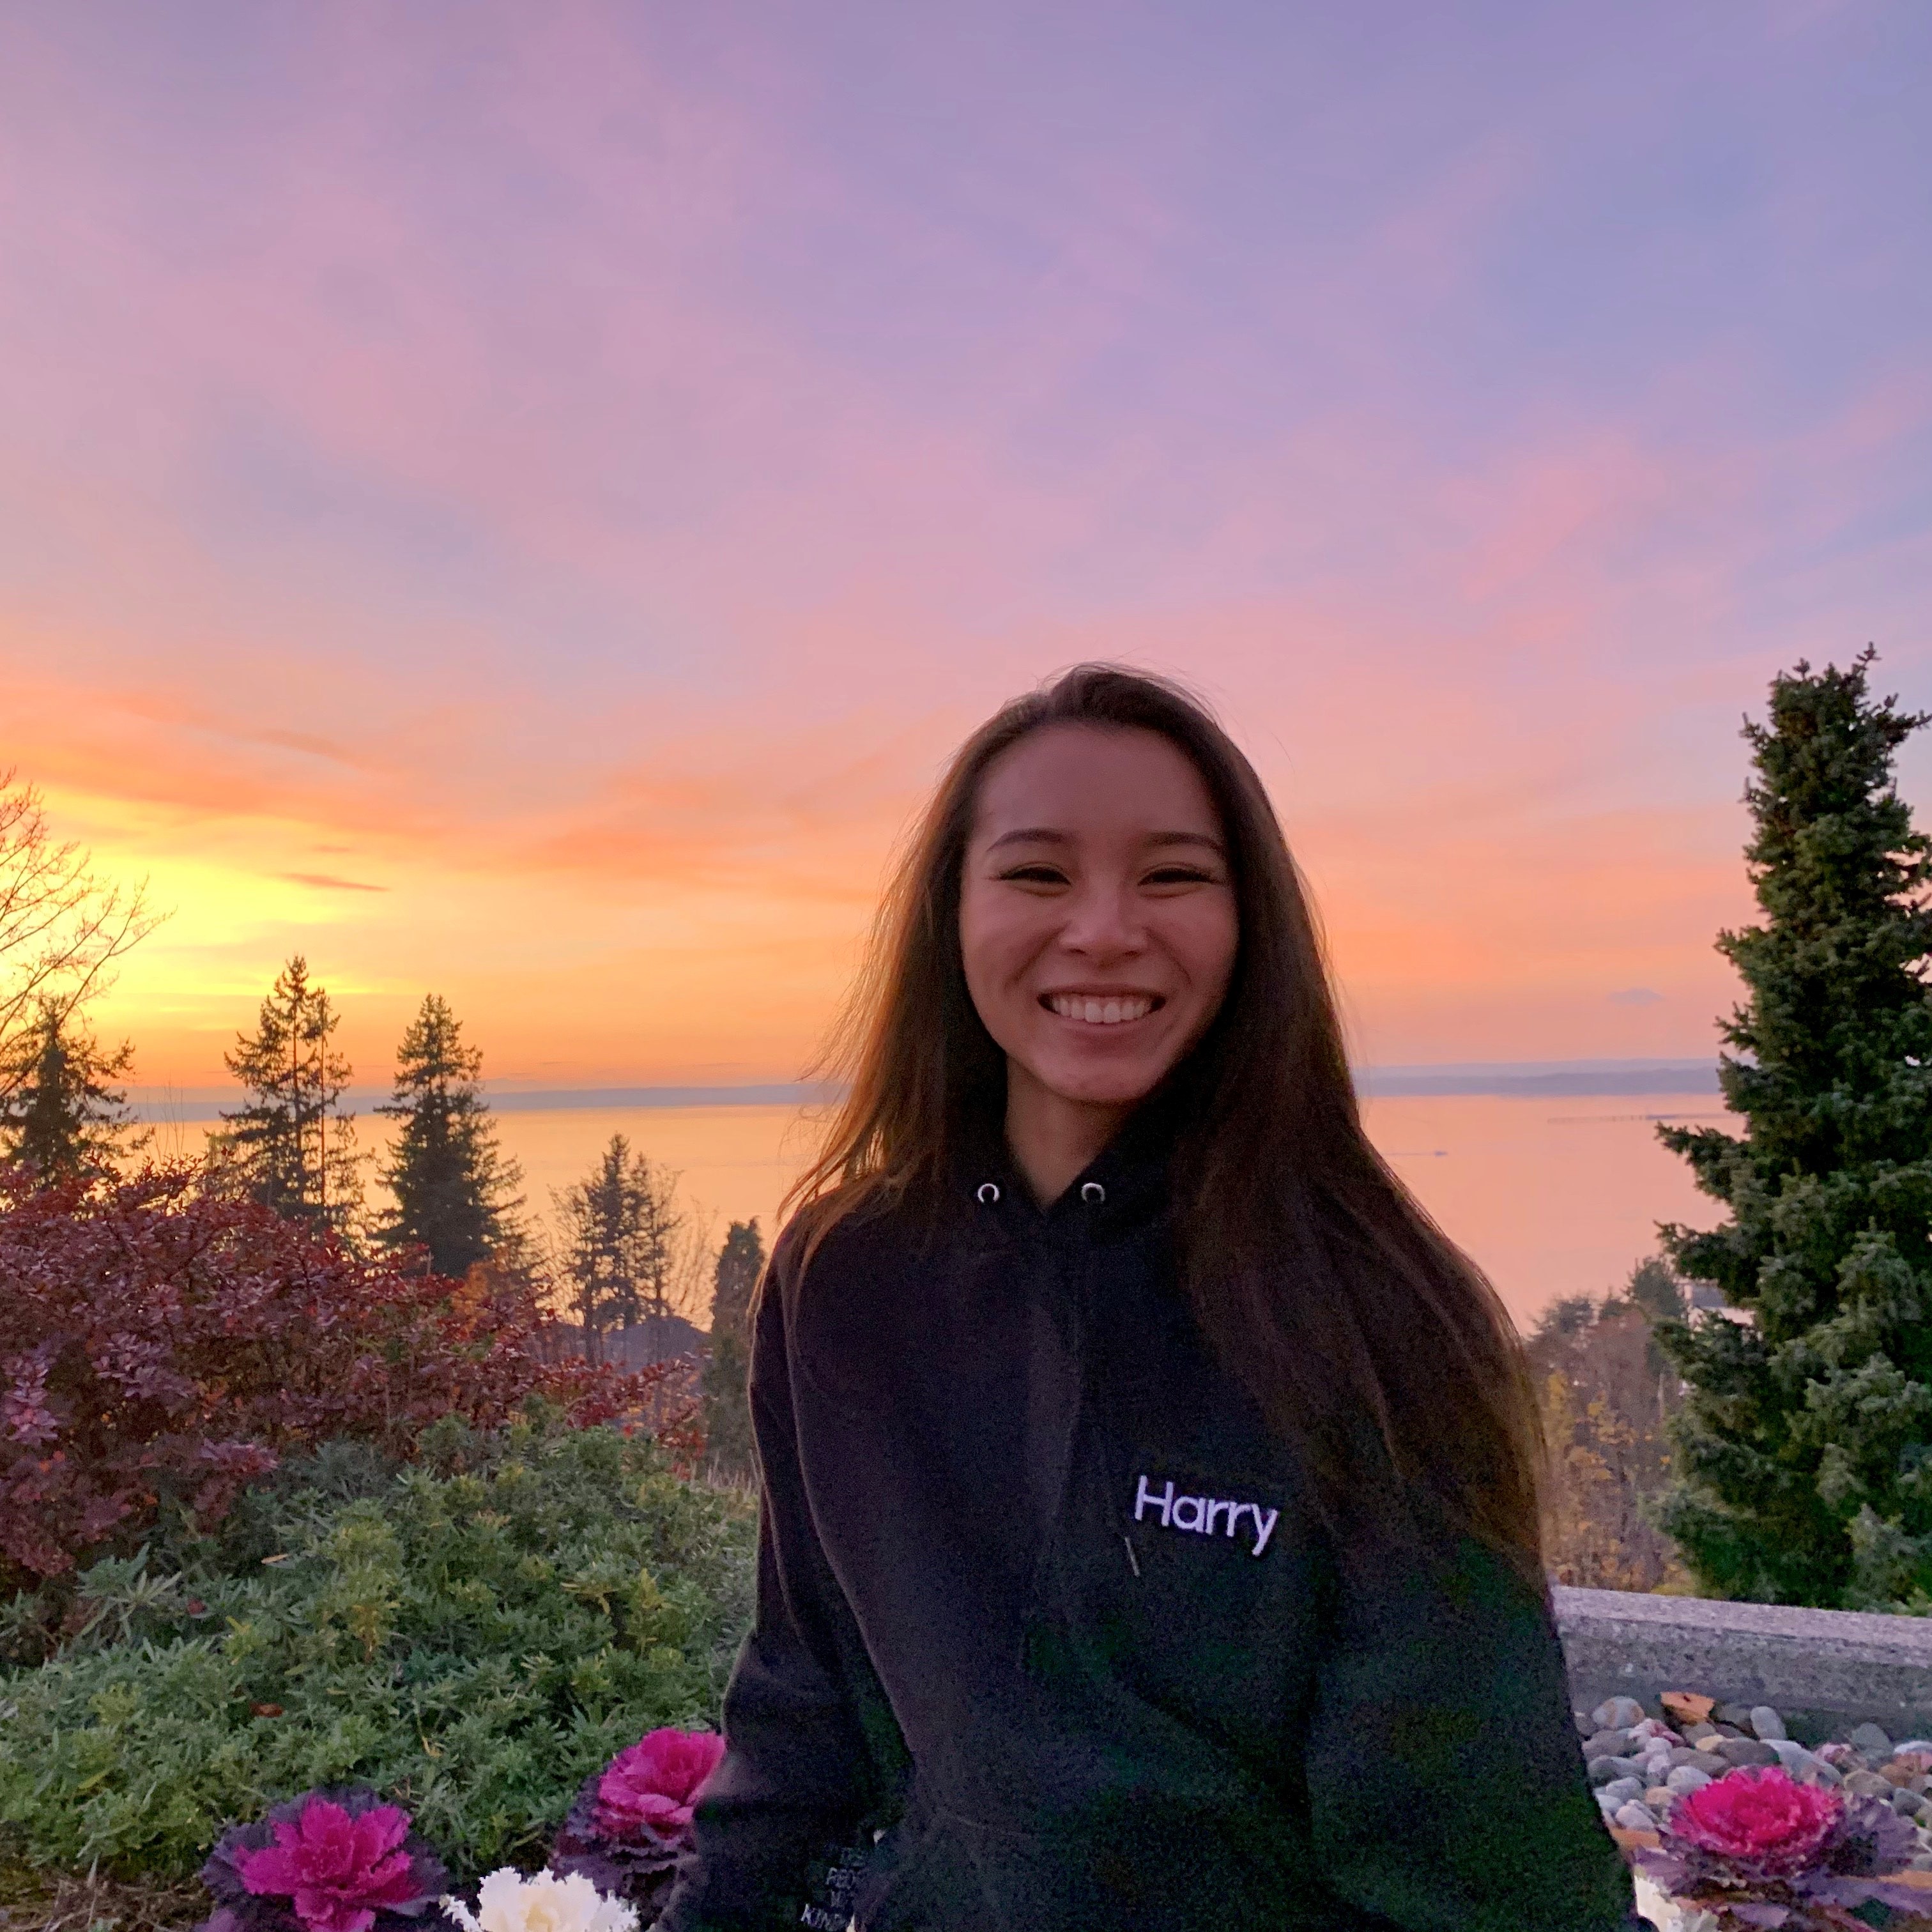 Victoria smiling at the camera during a sunset overlooking the Bellingham Bay